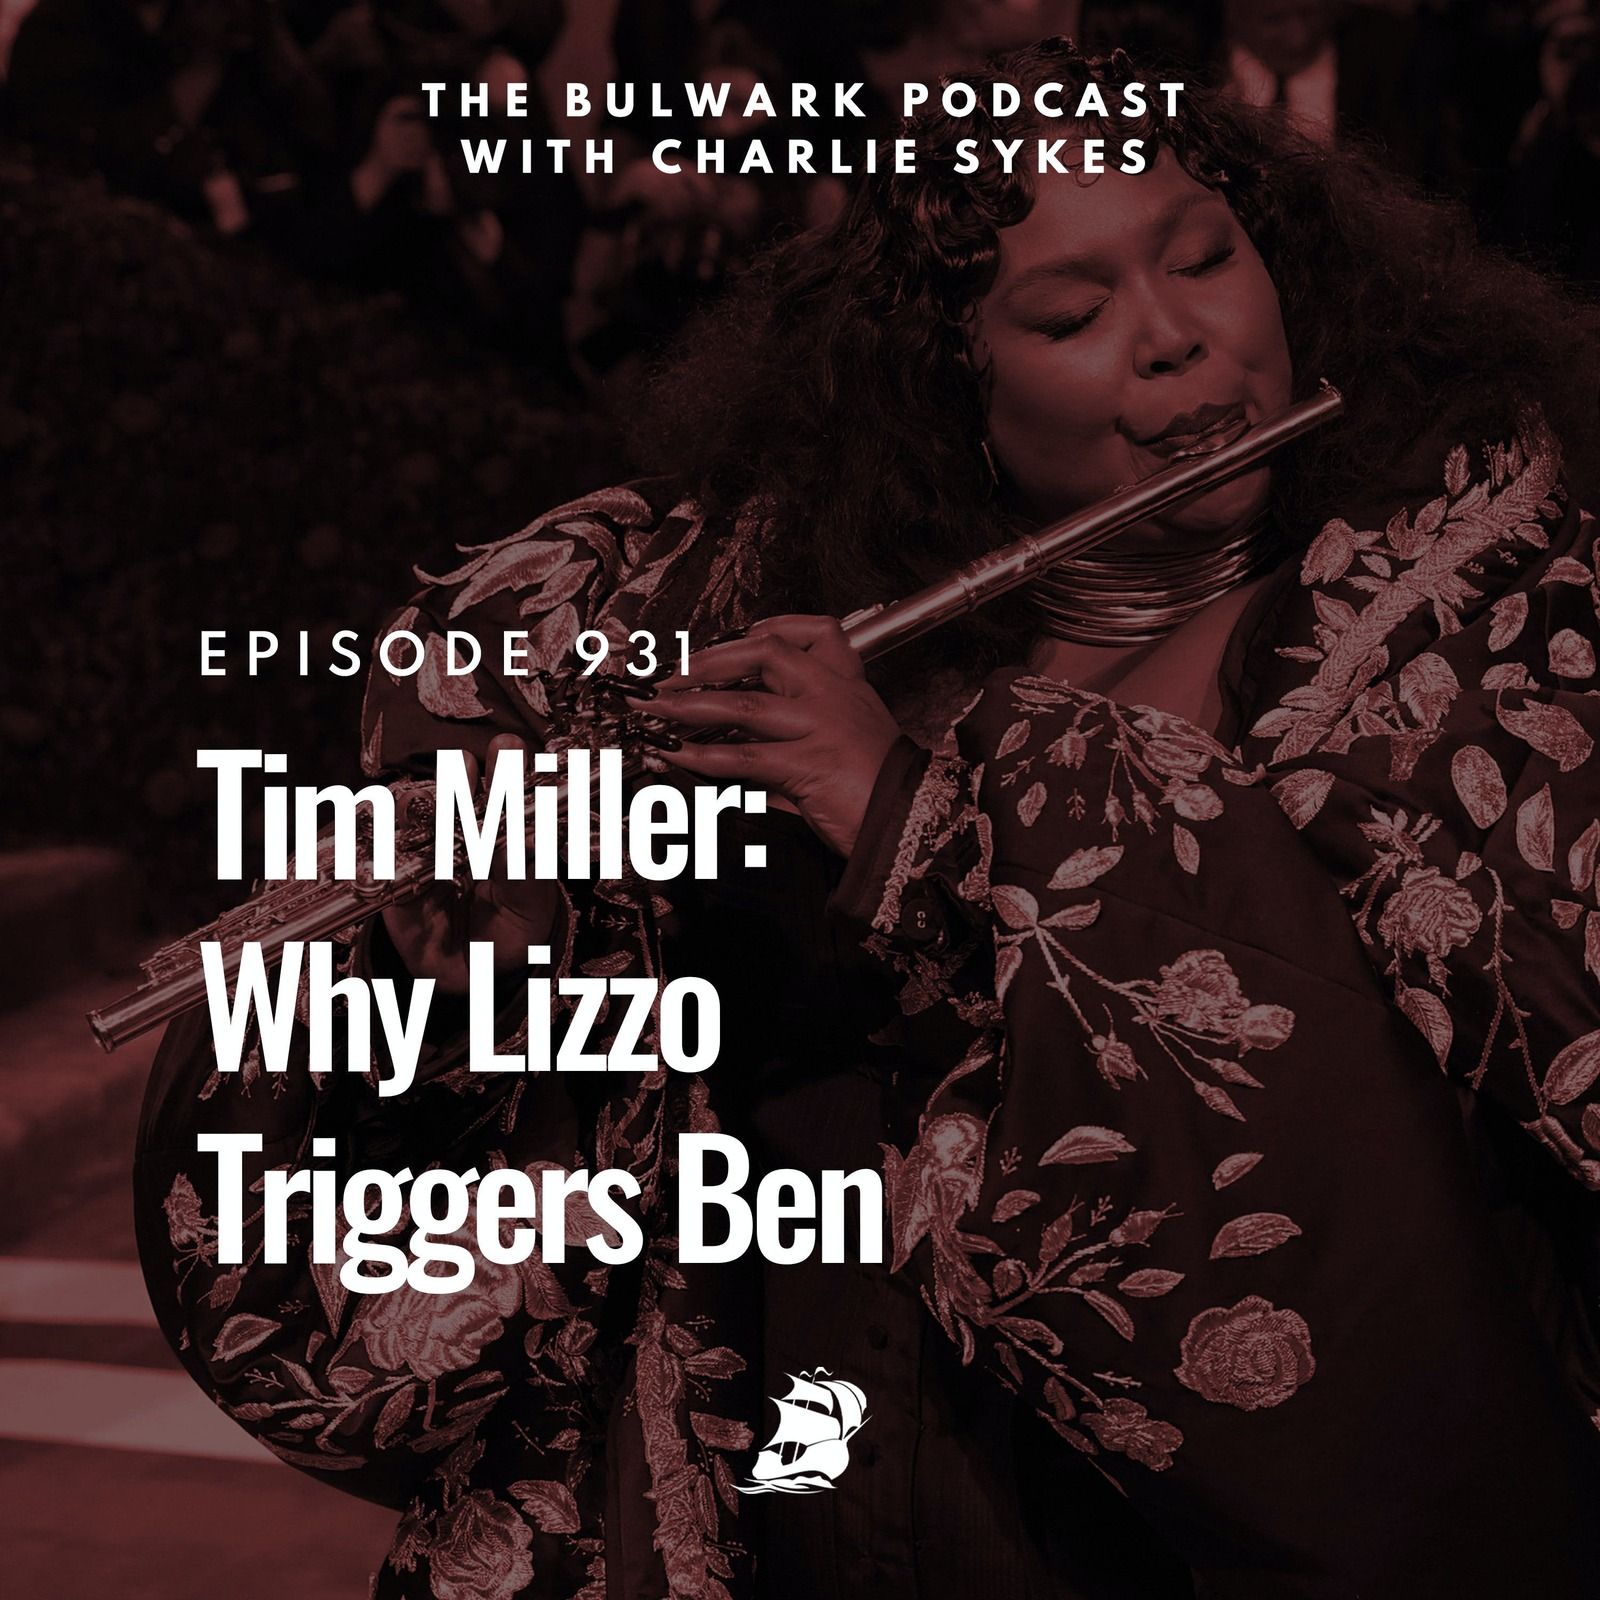 Tim Miller: Why Lizzo Triggers Ben by The Bulwark Podcast